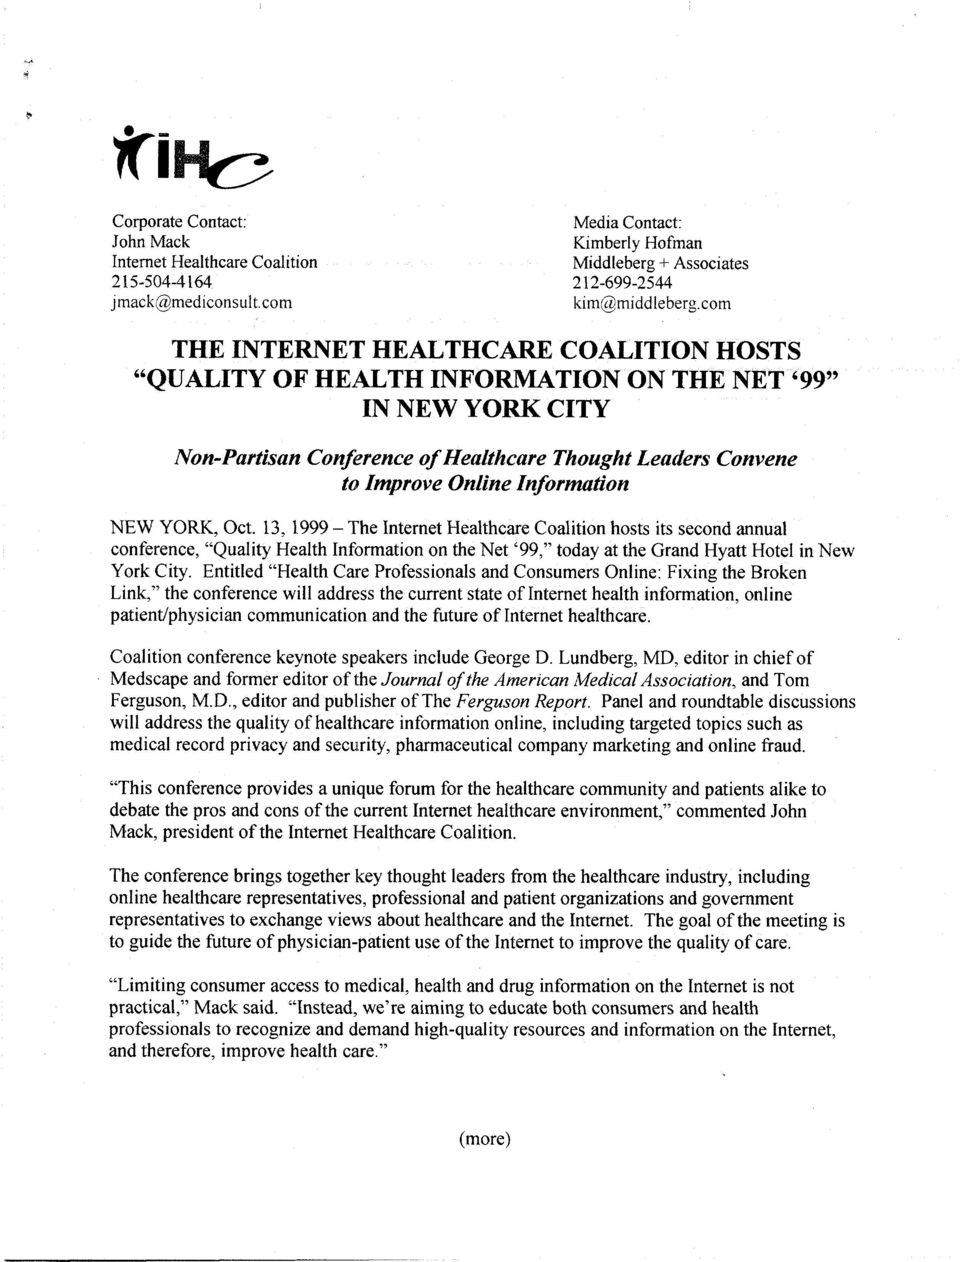 YORK, Oct. 13, 1999 - The Internet Heathcare Coaition hosts its second annua conference, Quaity Heath Information on the Net 99, today at the Grand Hyatt Hote in New York City.